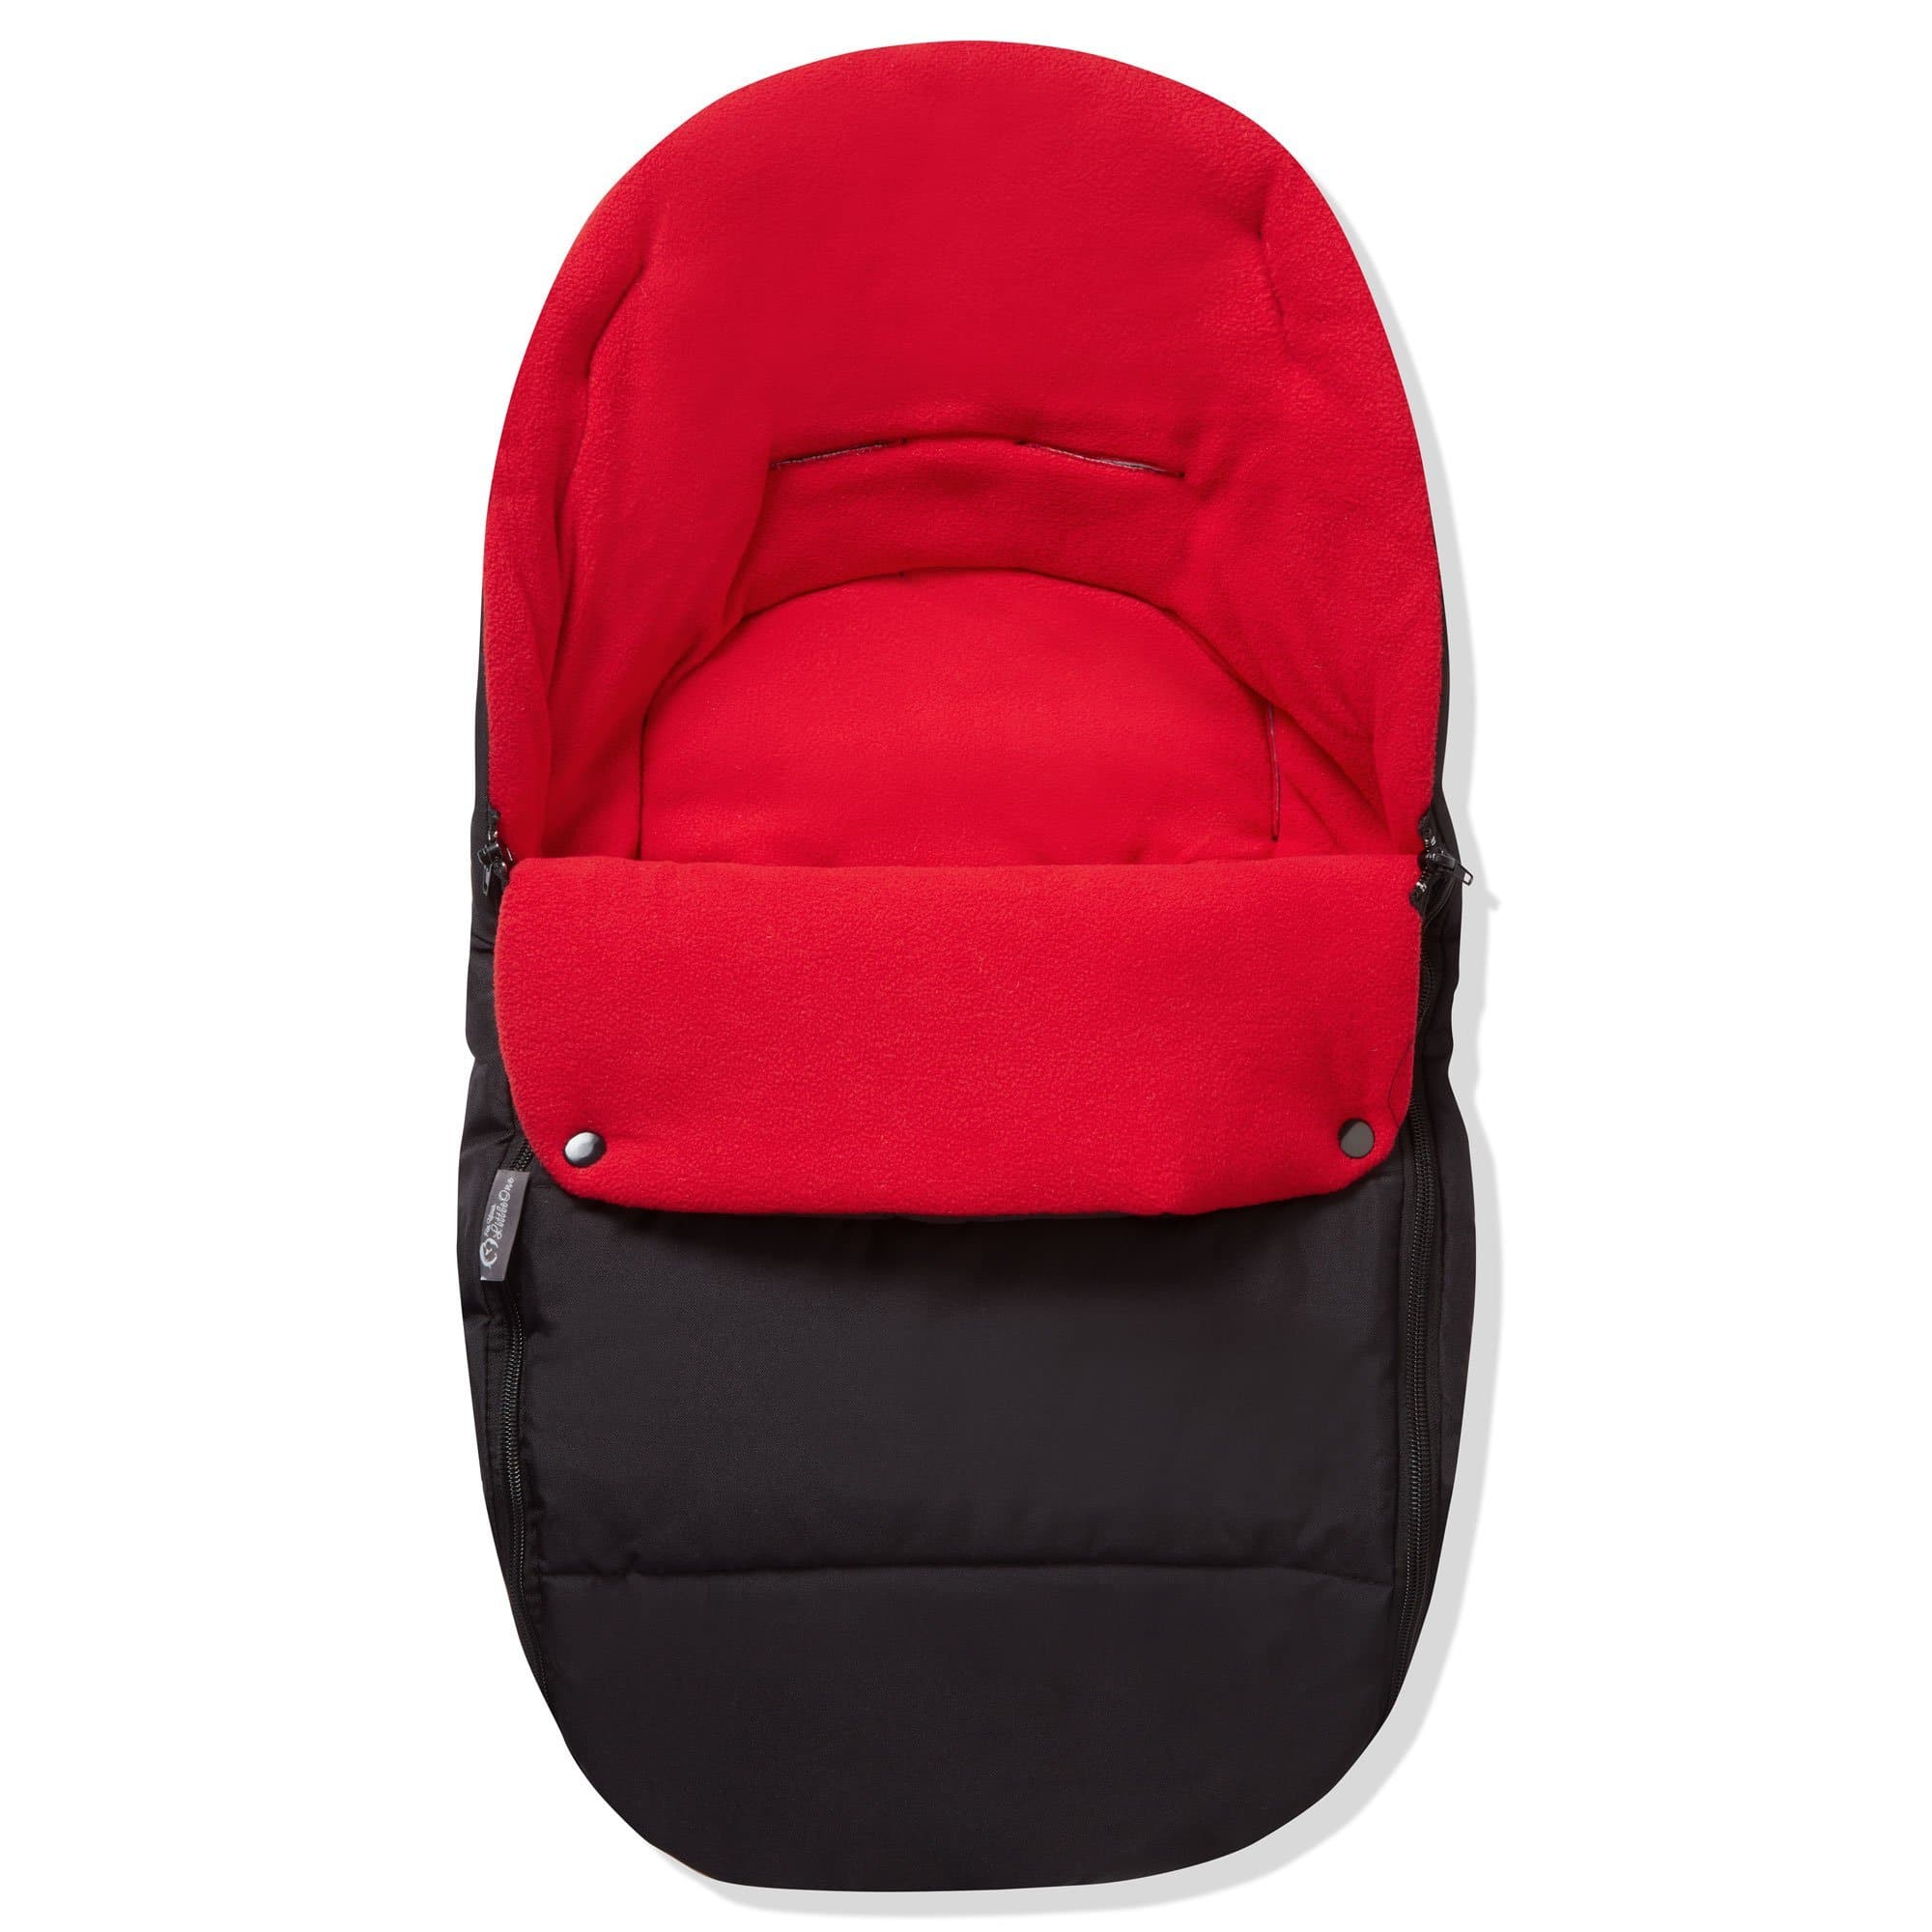 Premium Car Seat Footmuff / Cosy Toes Compatible with Joie - Fire Red / Fits All Models | For Your Little One